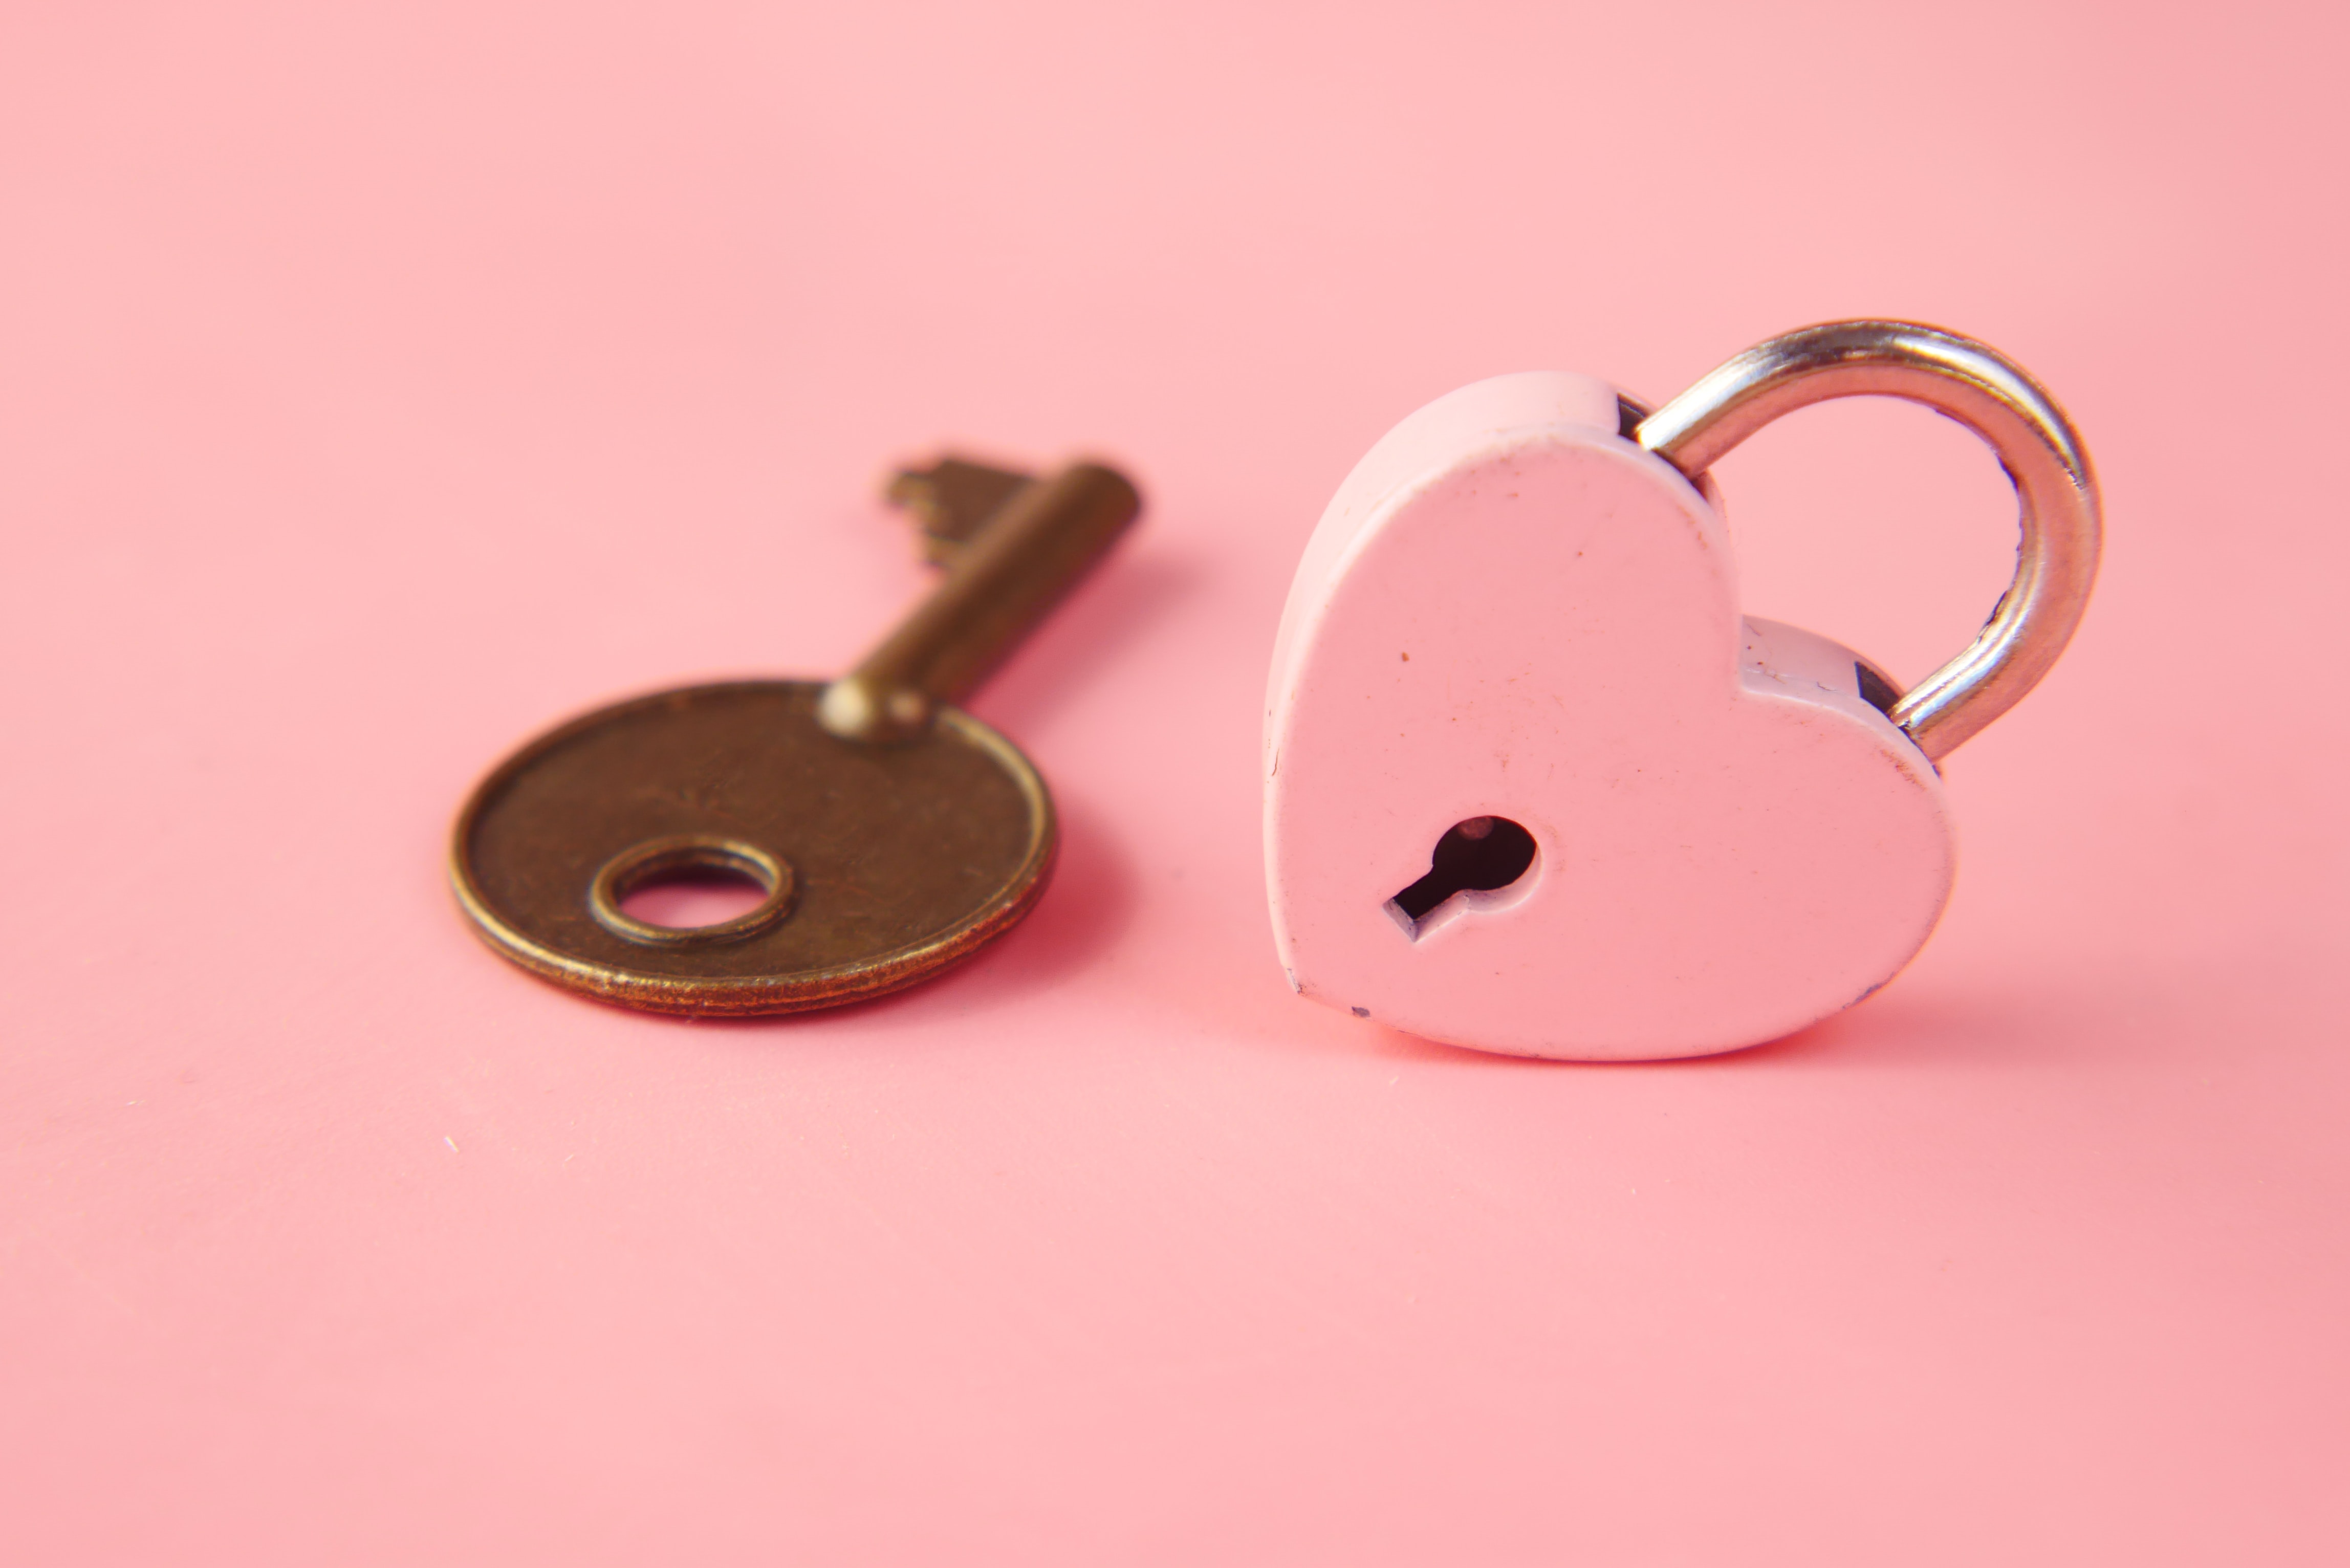 pink heart shaped lock withkey besides it